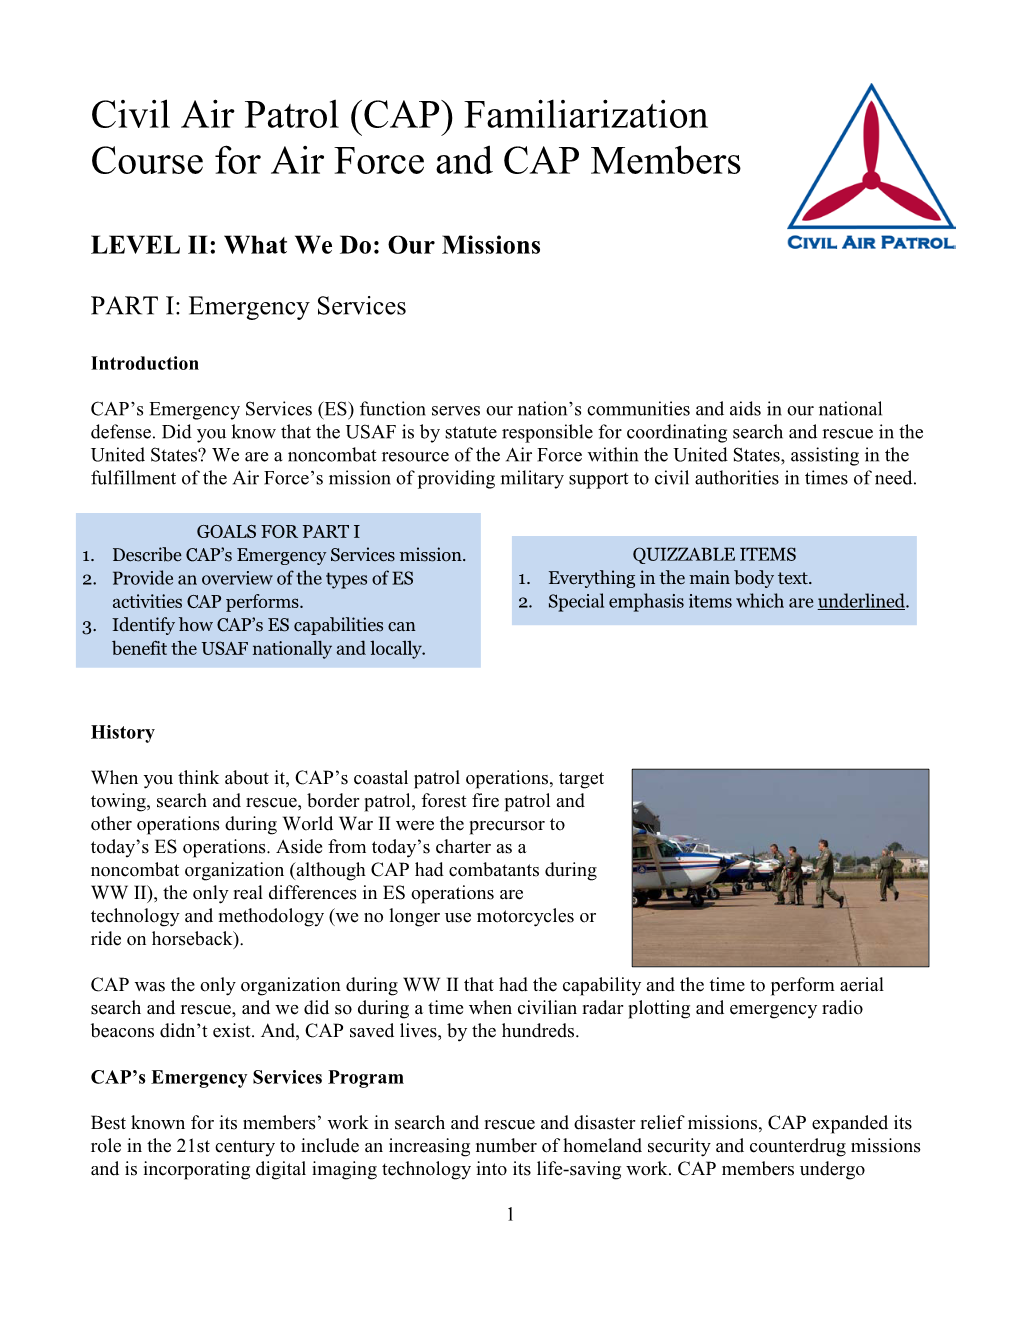 Familiarization Course for Air Force and CAP Members